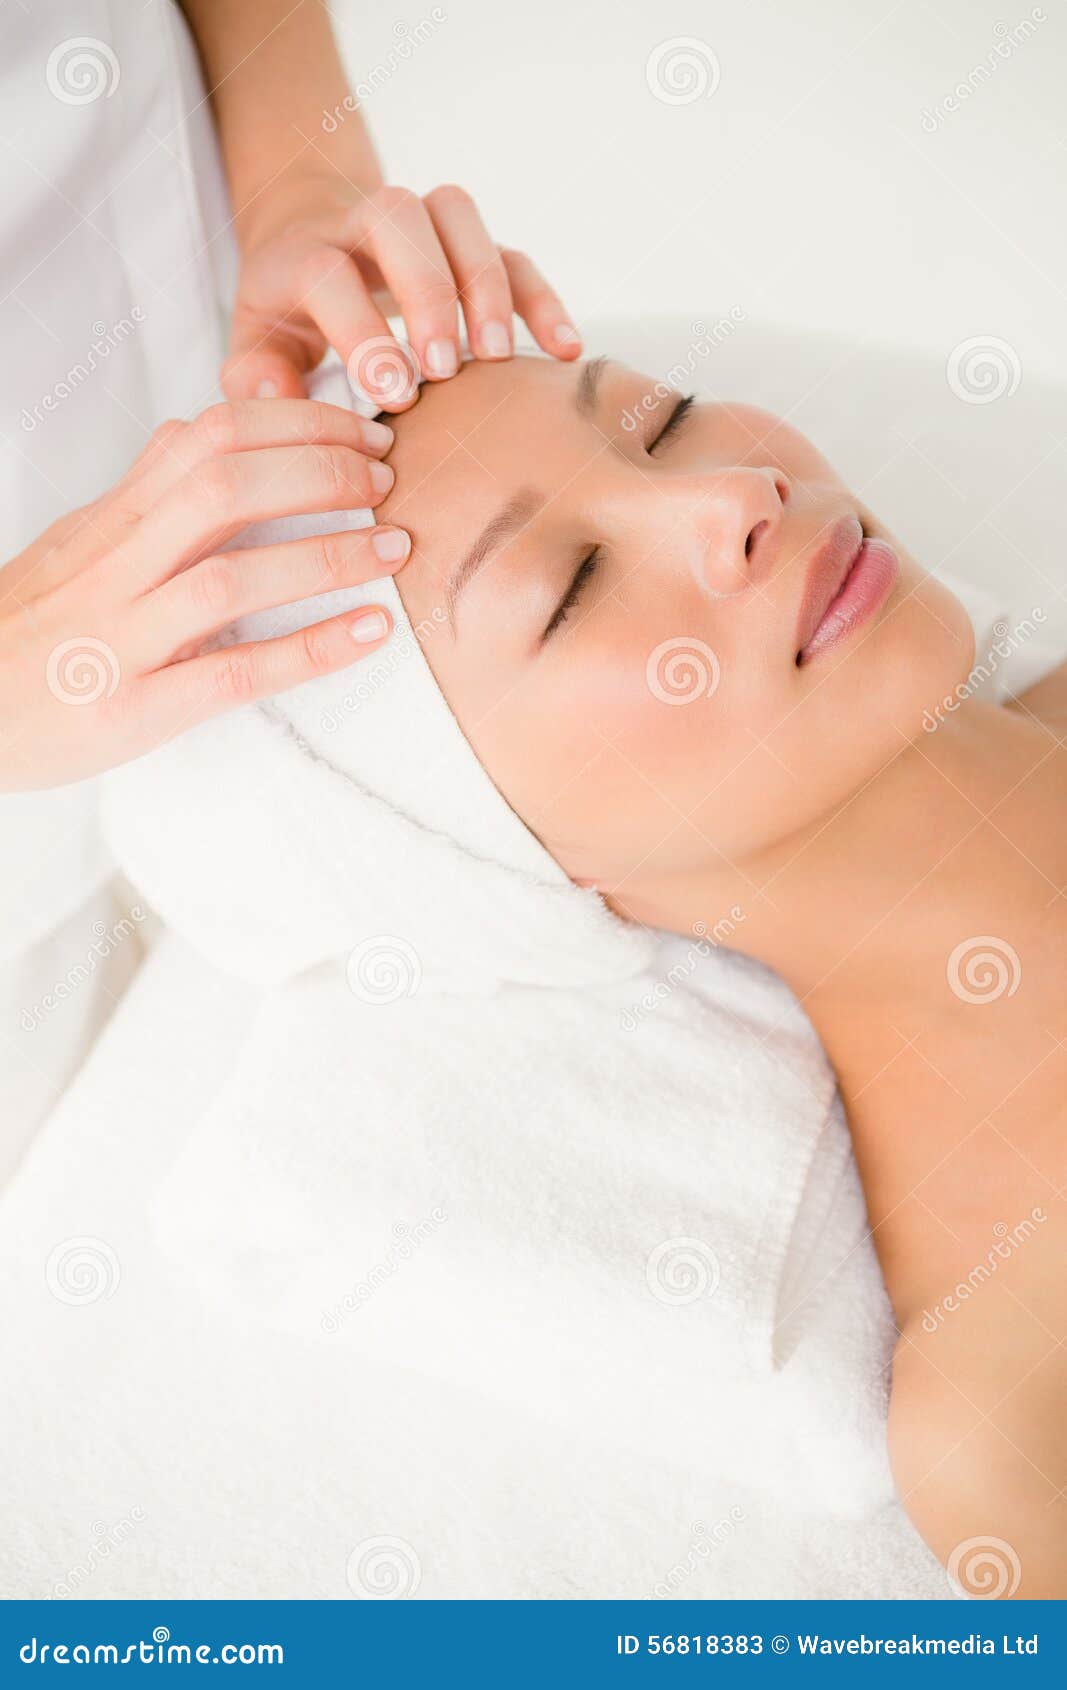 Attractive Young Woman Receiving Forehead Massage Stock Image Image Of Face Shoulder 56818383